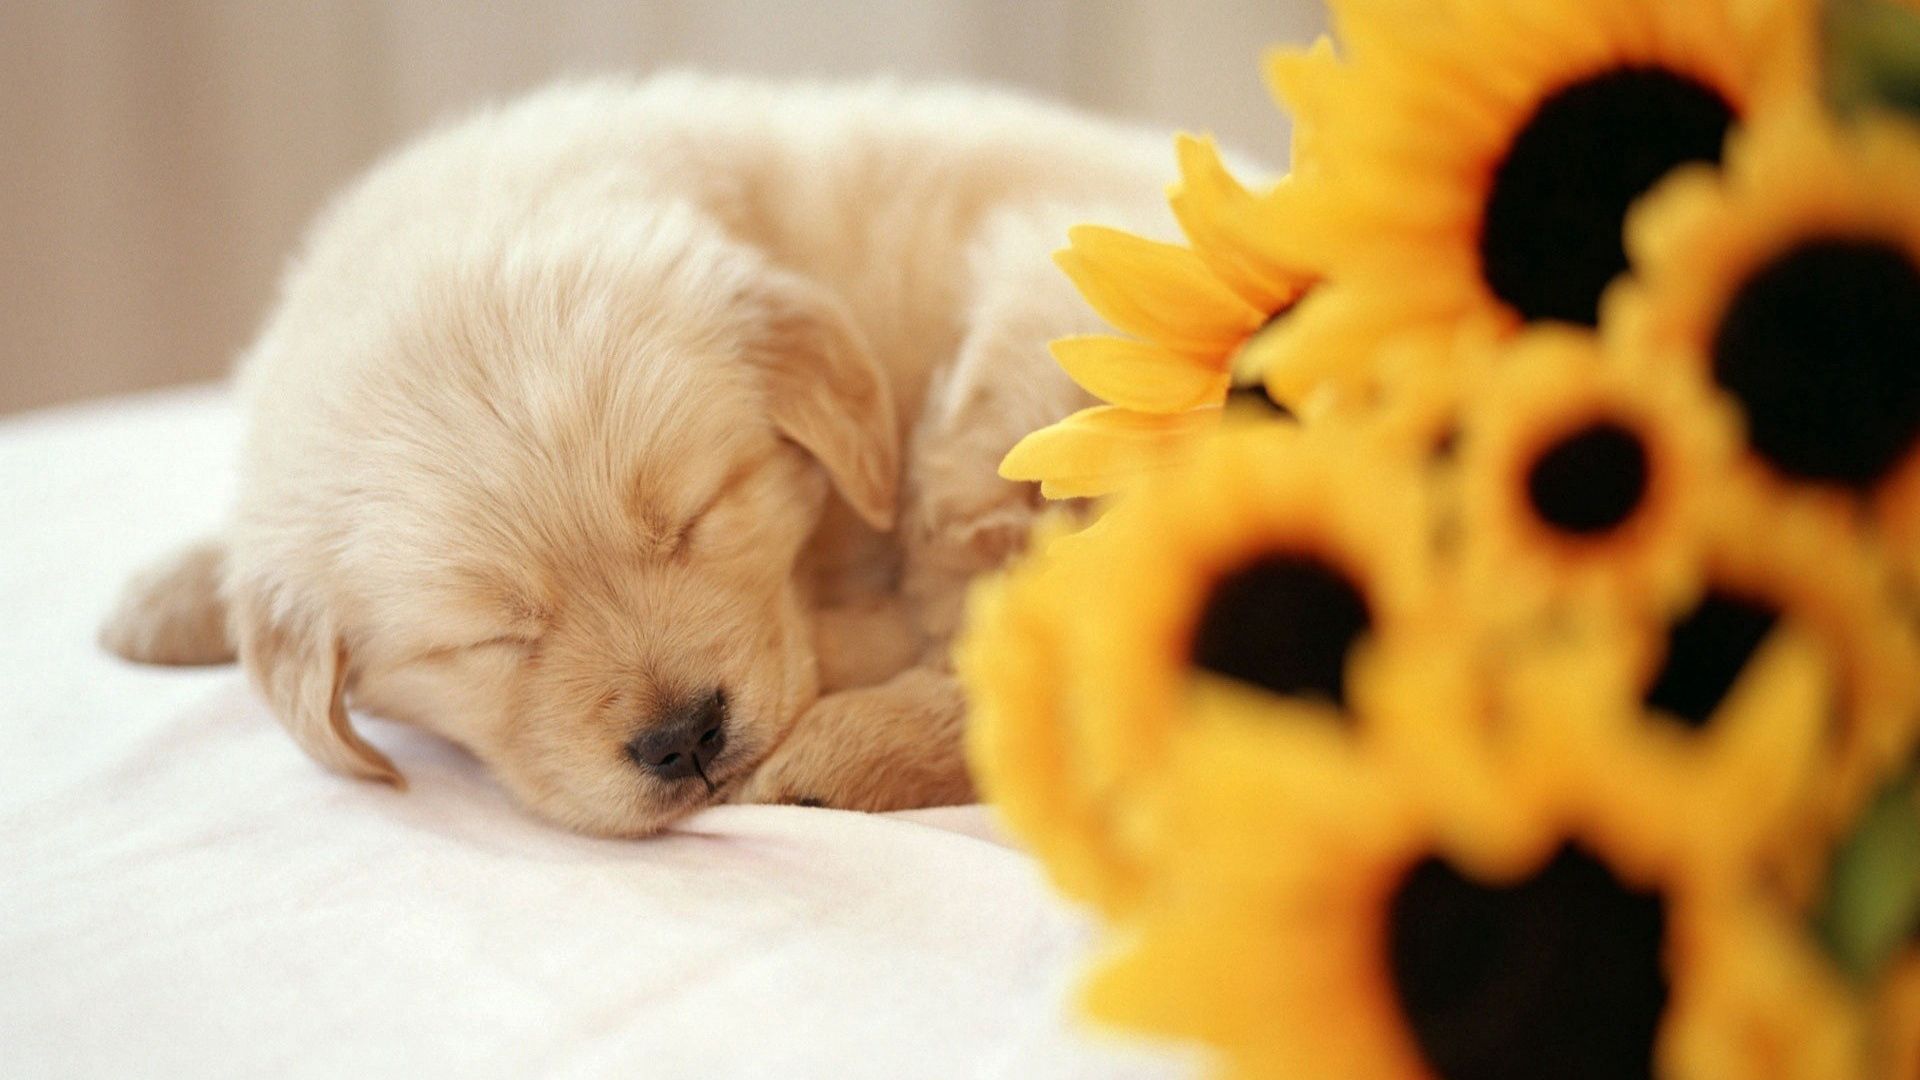 123865 download wallpaper animals, flowers, bouquet, sweet, puppy, sleep, dream screensavers and pictures for free